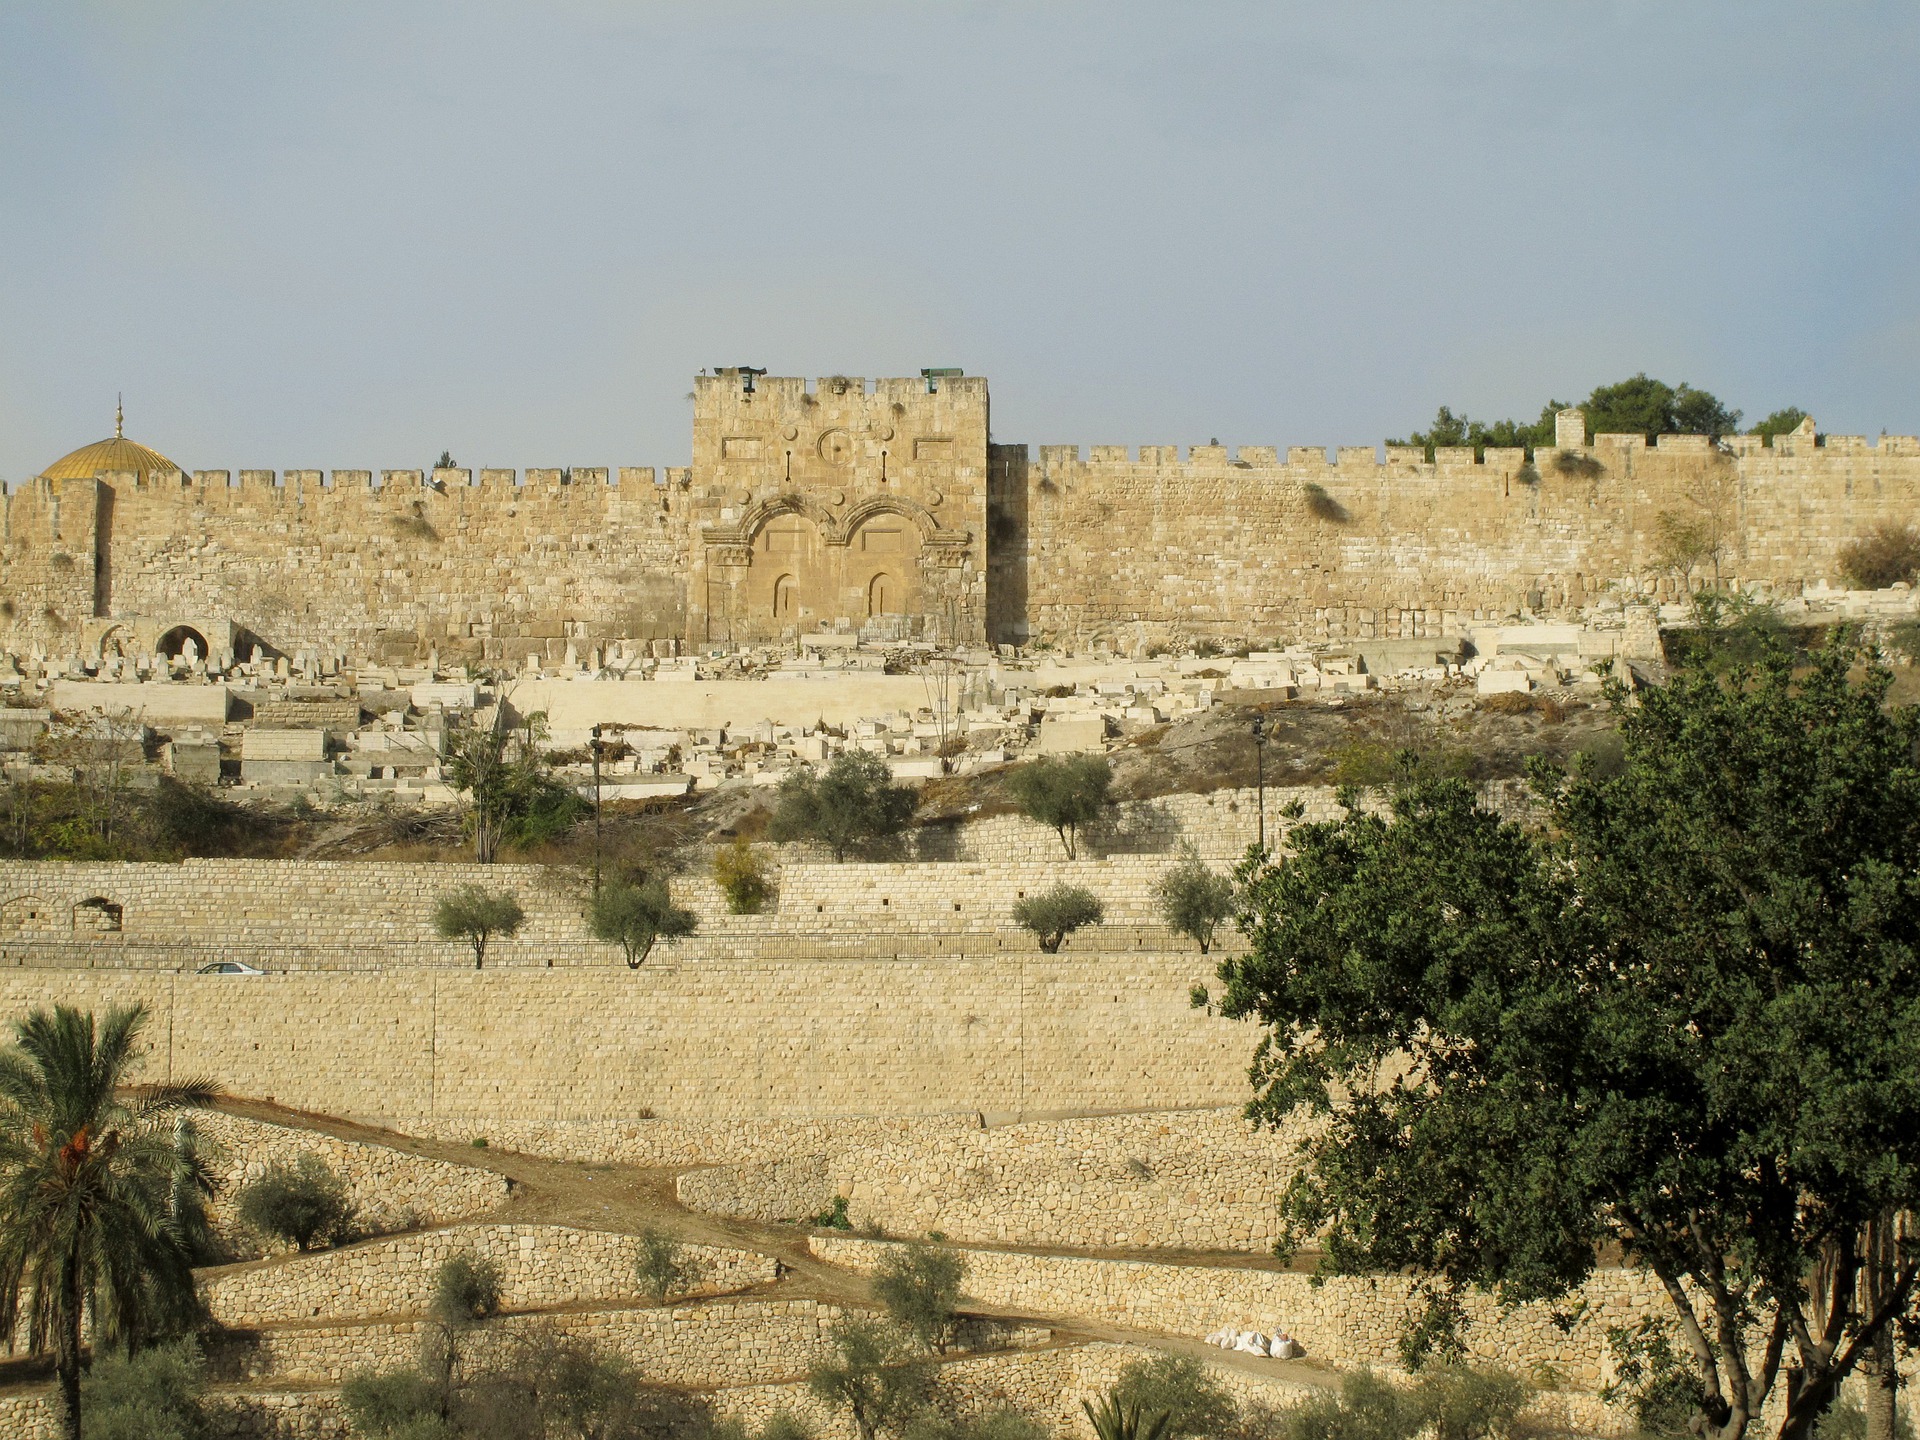 Who built the wall of Jerusalem?